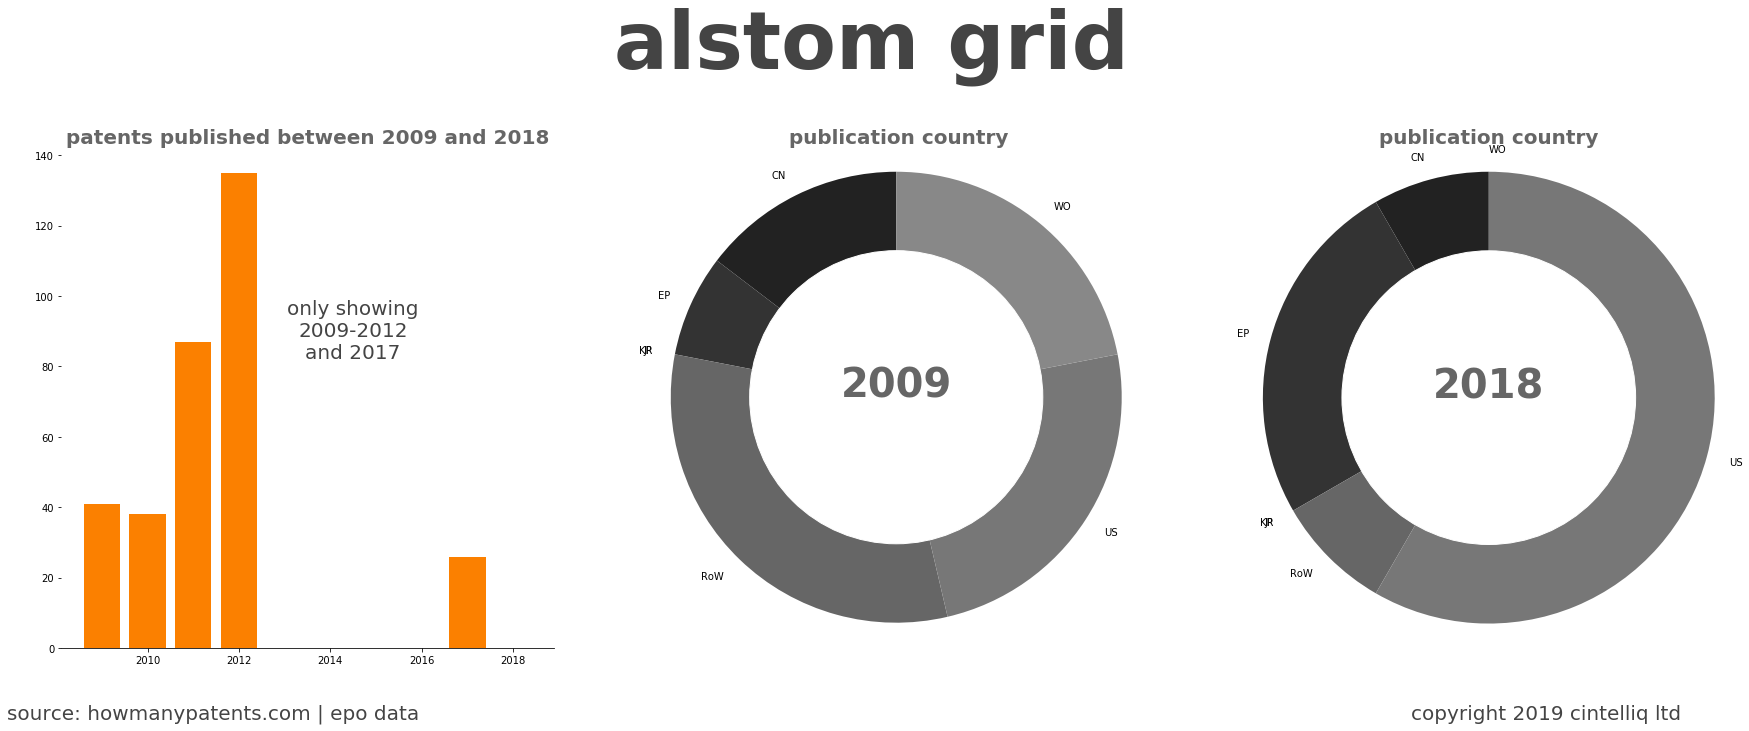 summary of patents for Alstom Grid